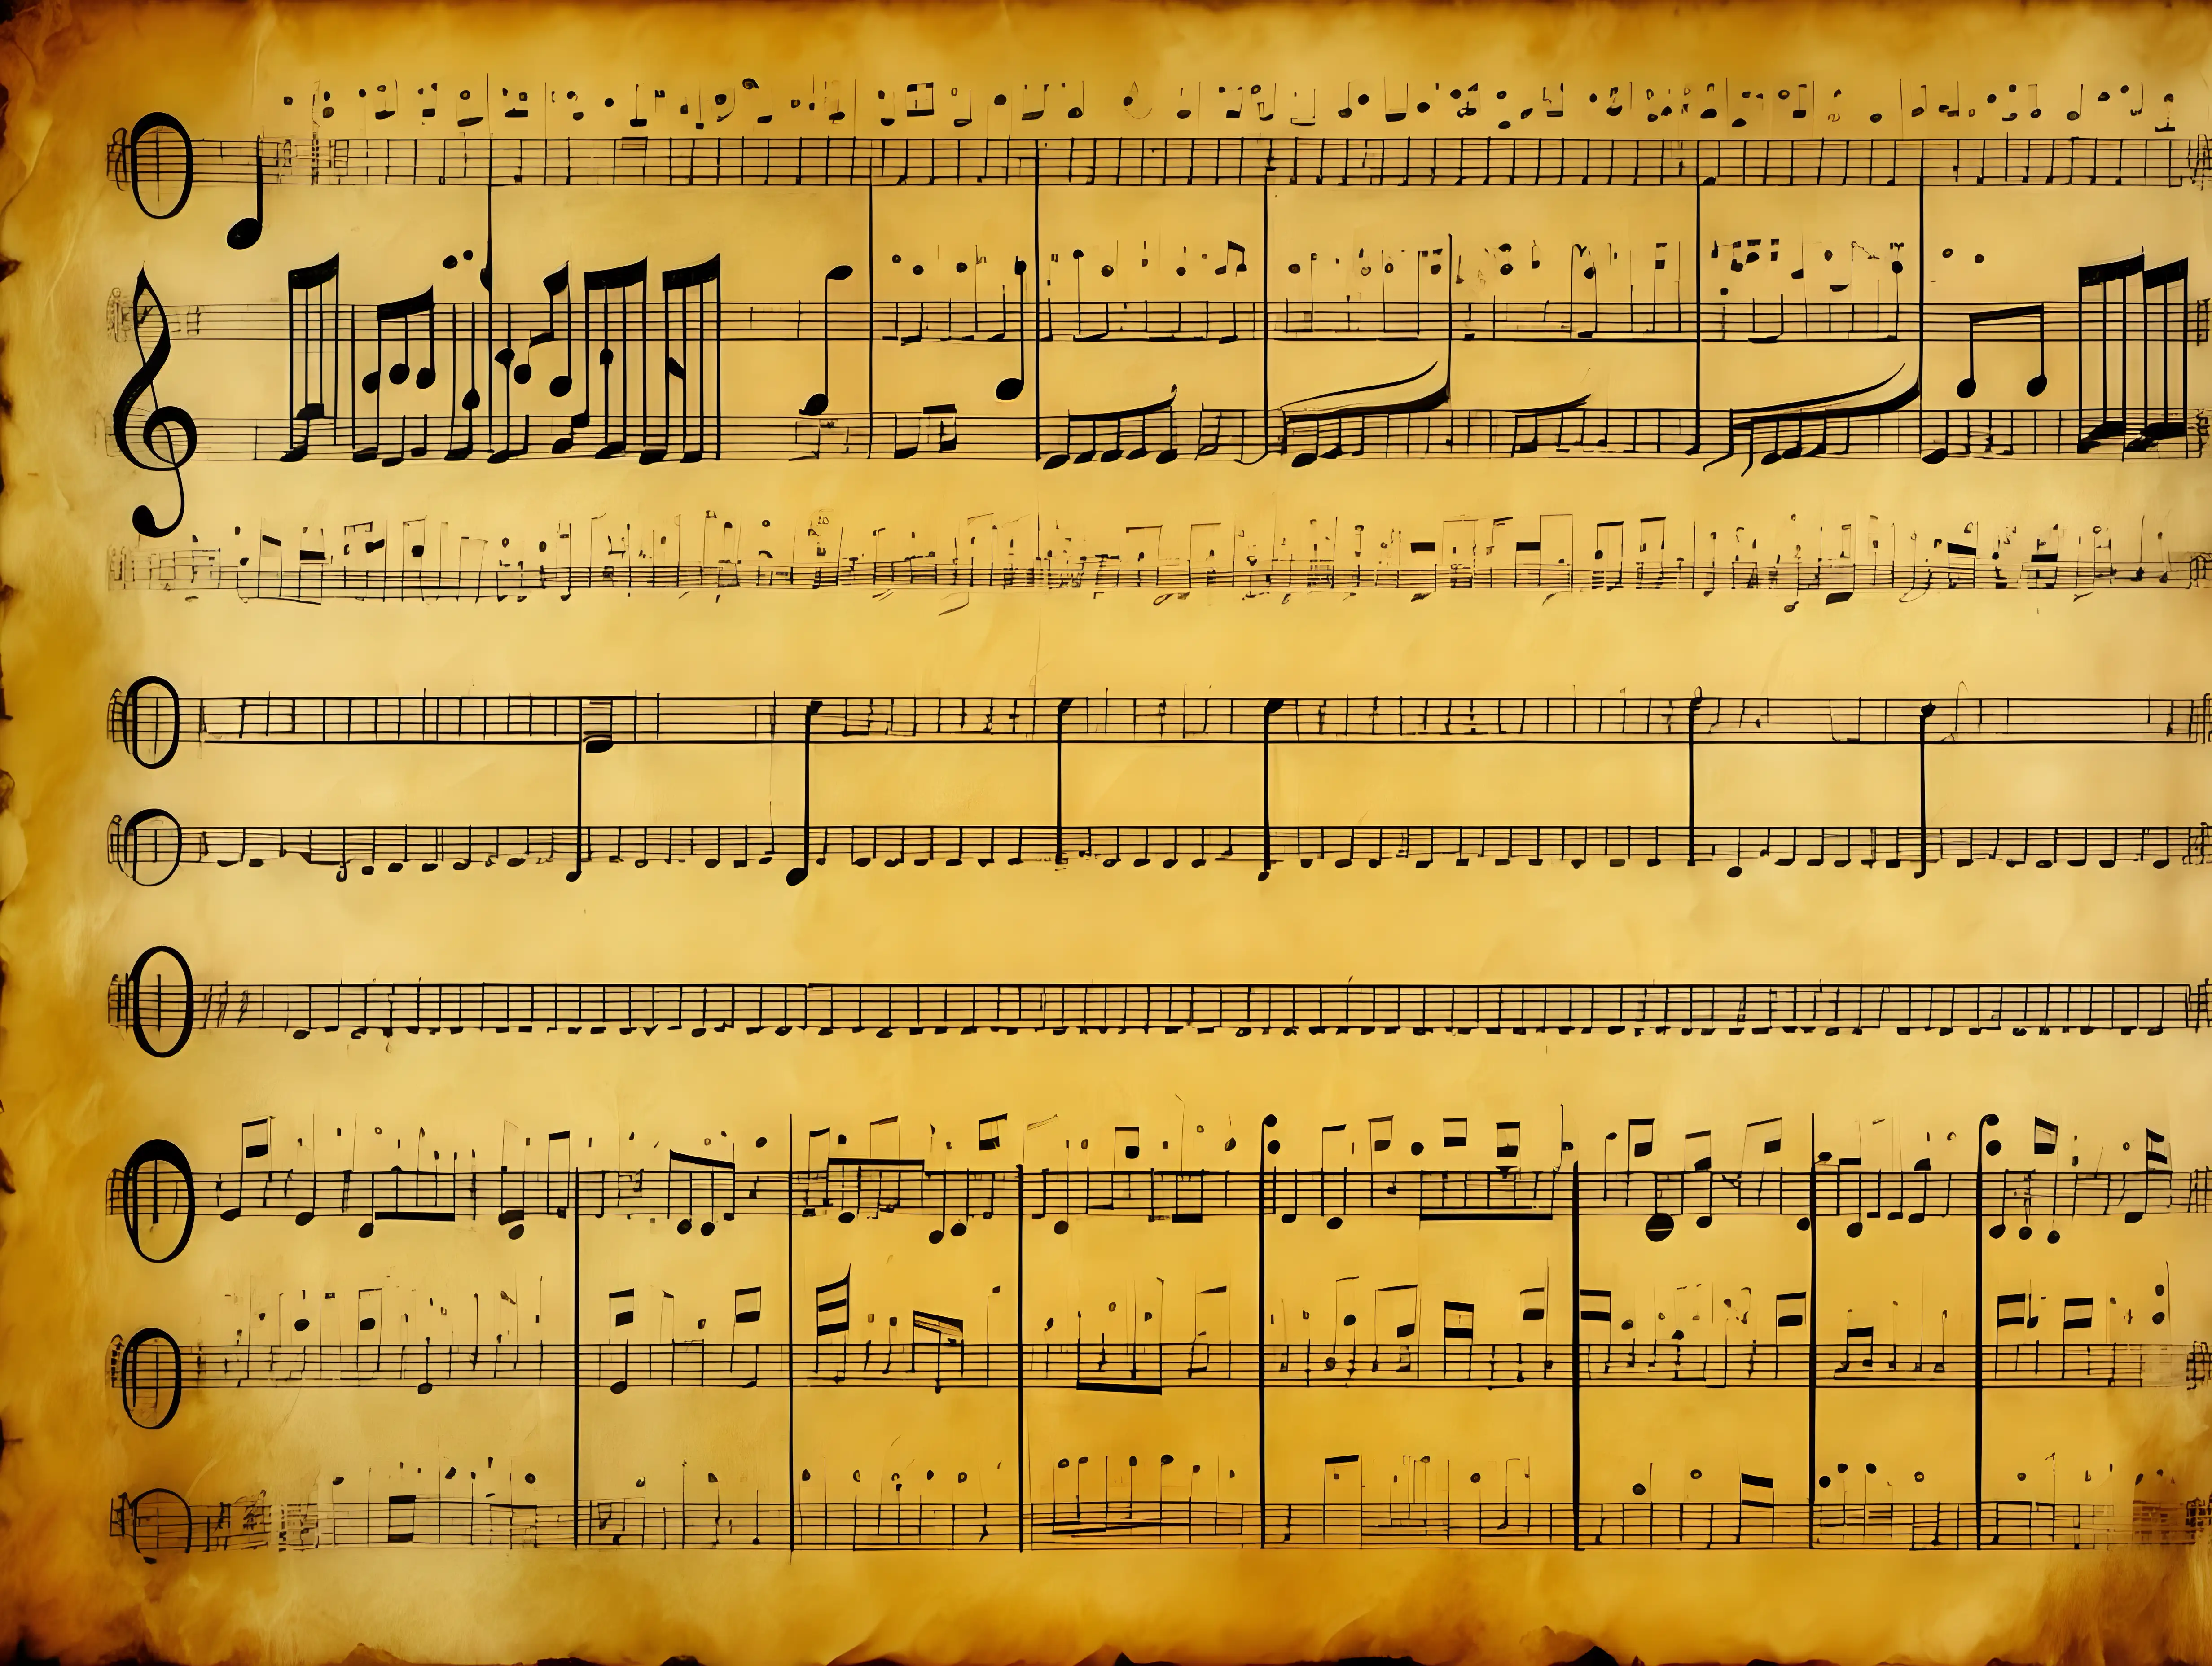 Harmonious Symphony of Music Notes on Vintage Yellow Parchment